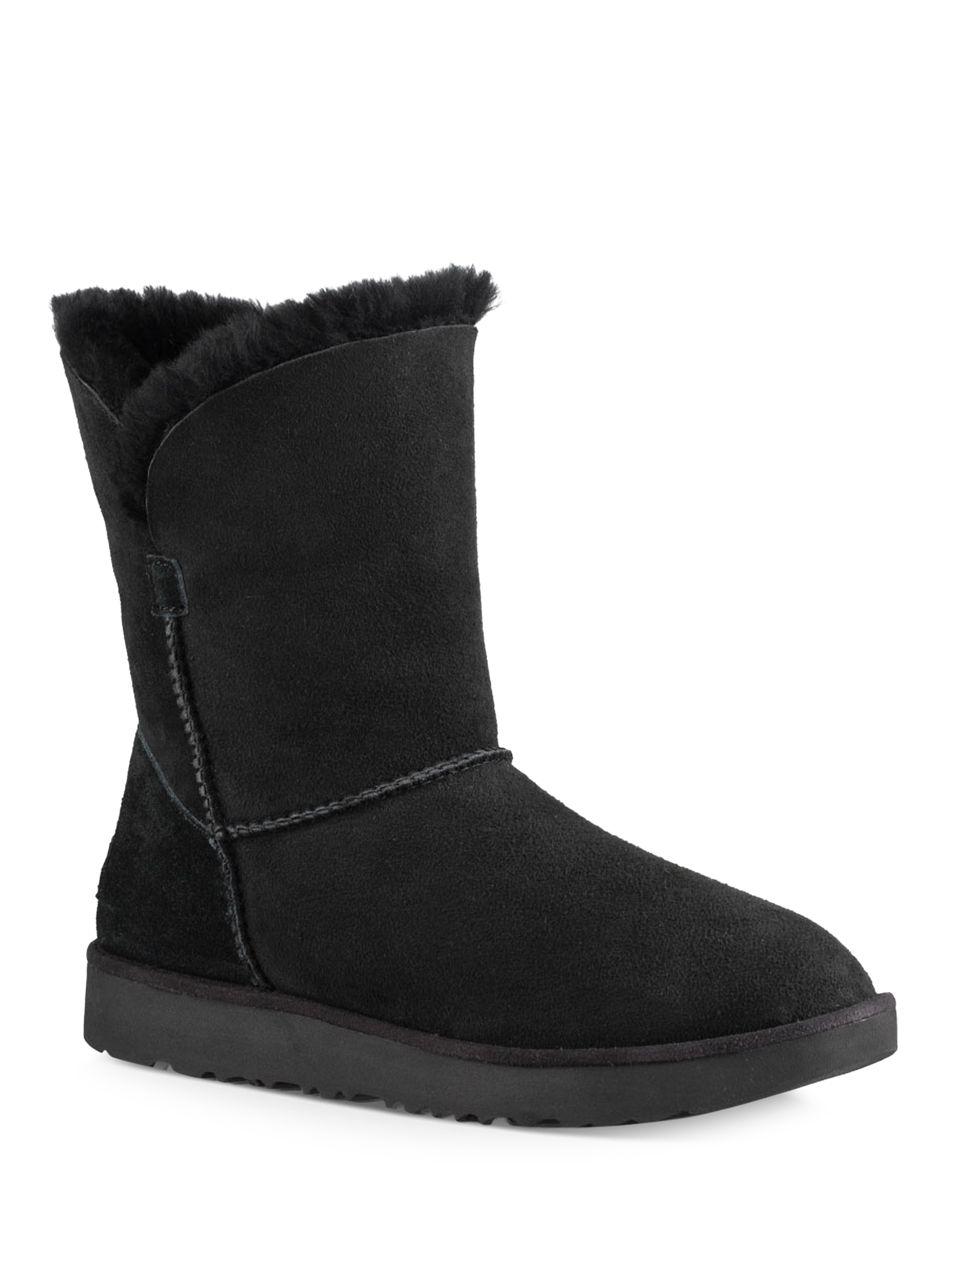 Ugg Classic Cuff Fur Suede Ankle Boots in Black | Lyst